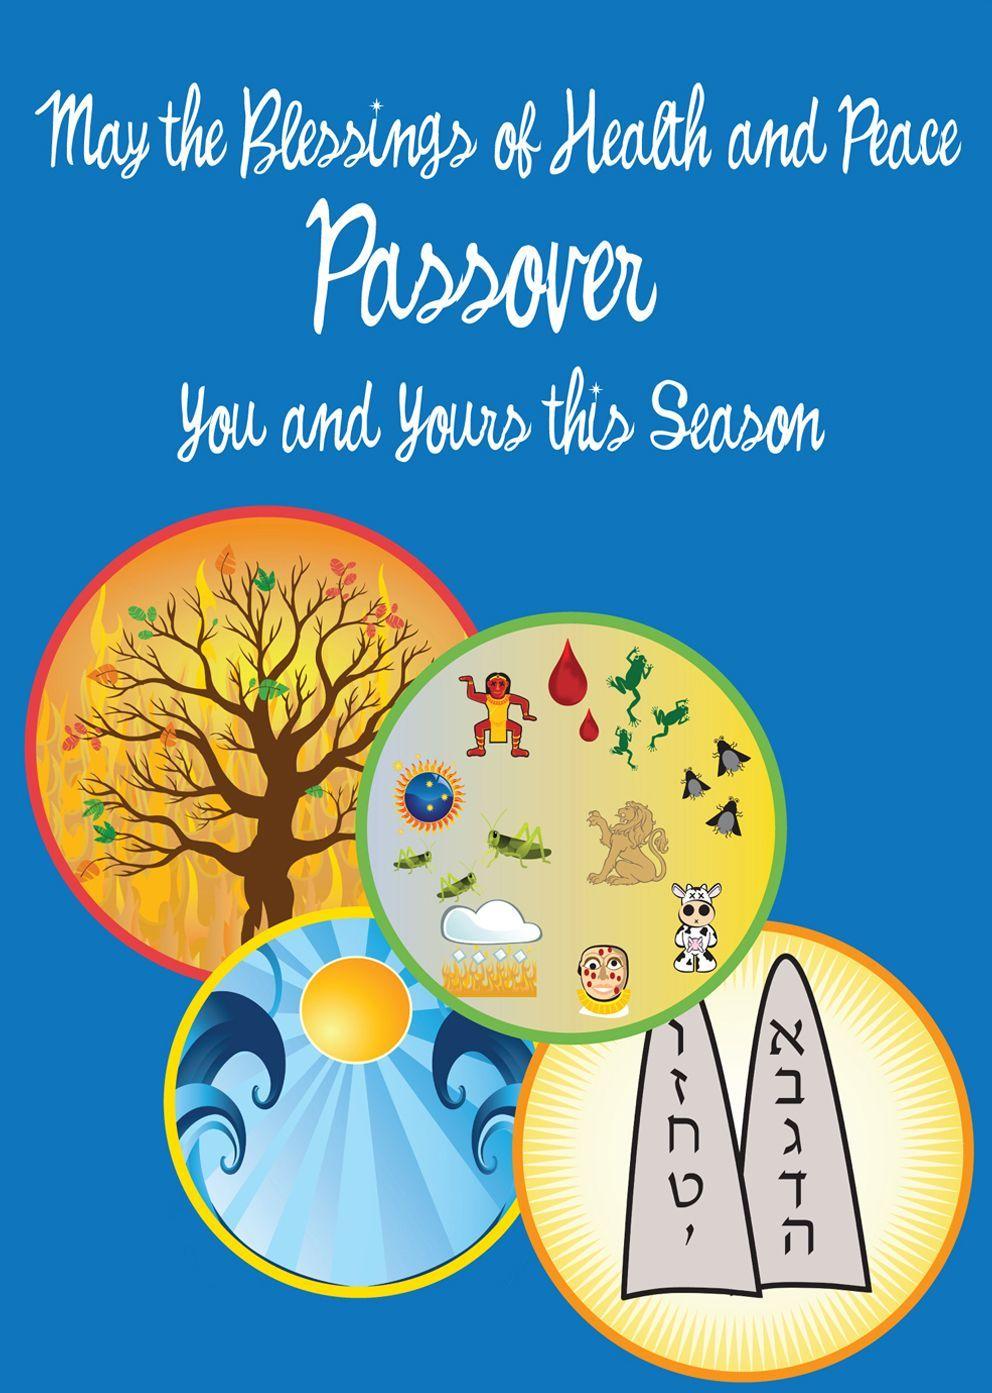 Happy Passover Online Greeting Cards Passover Day HD image